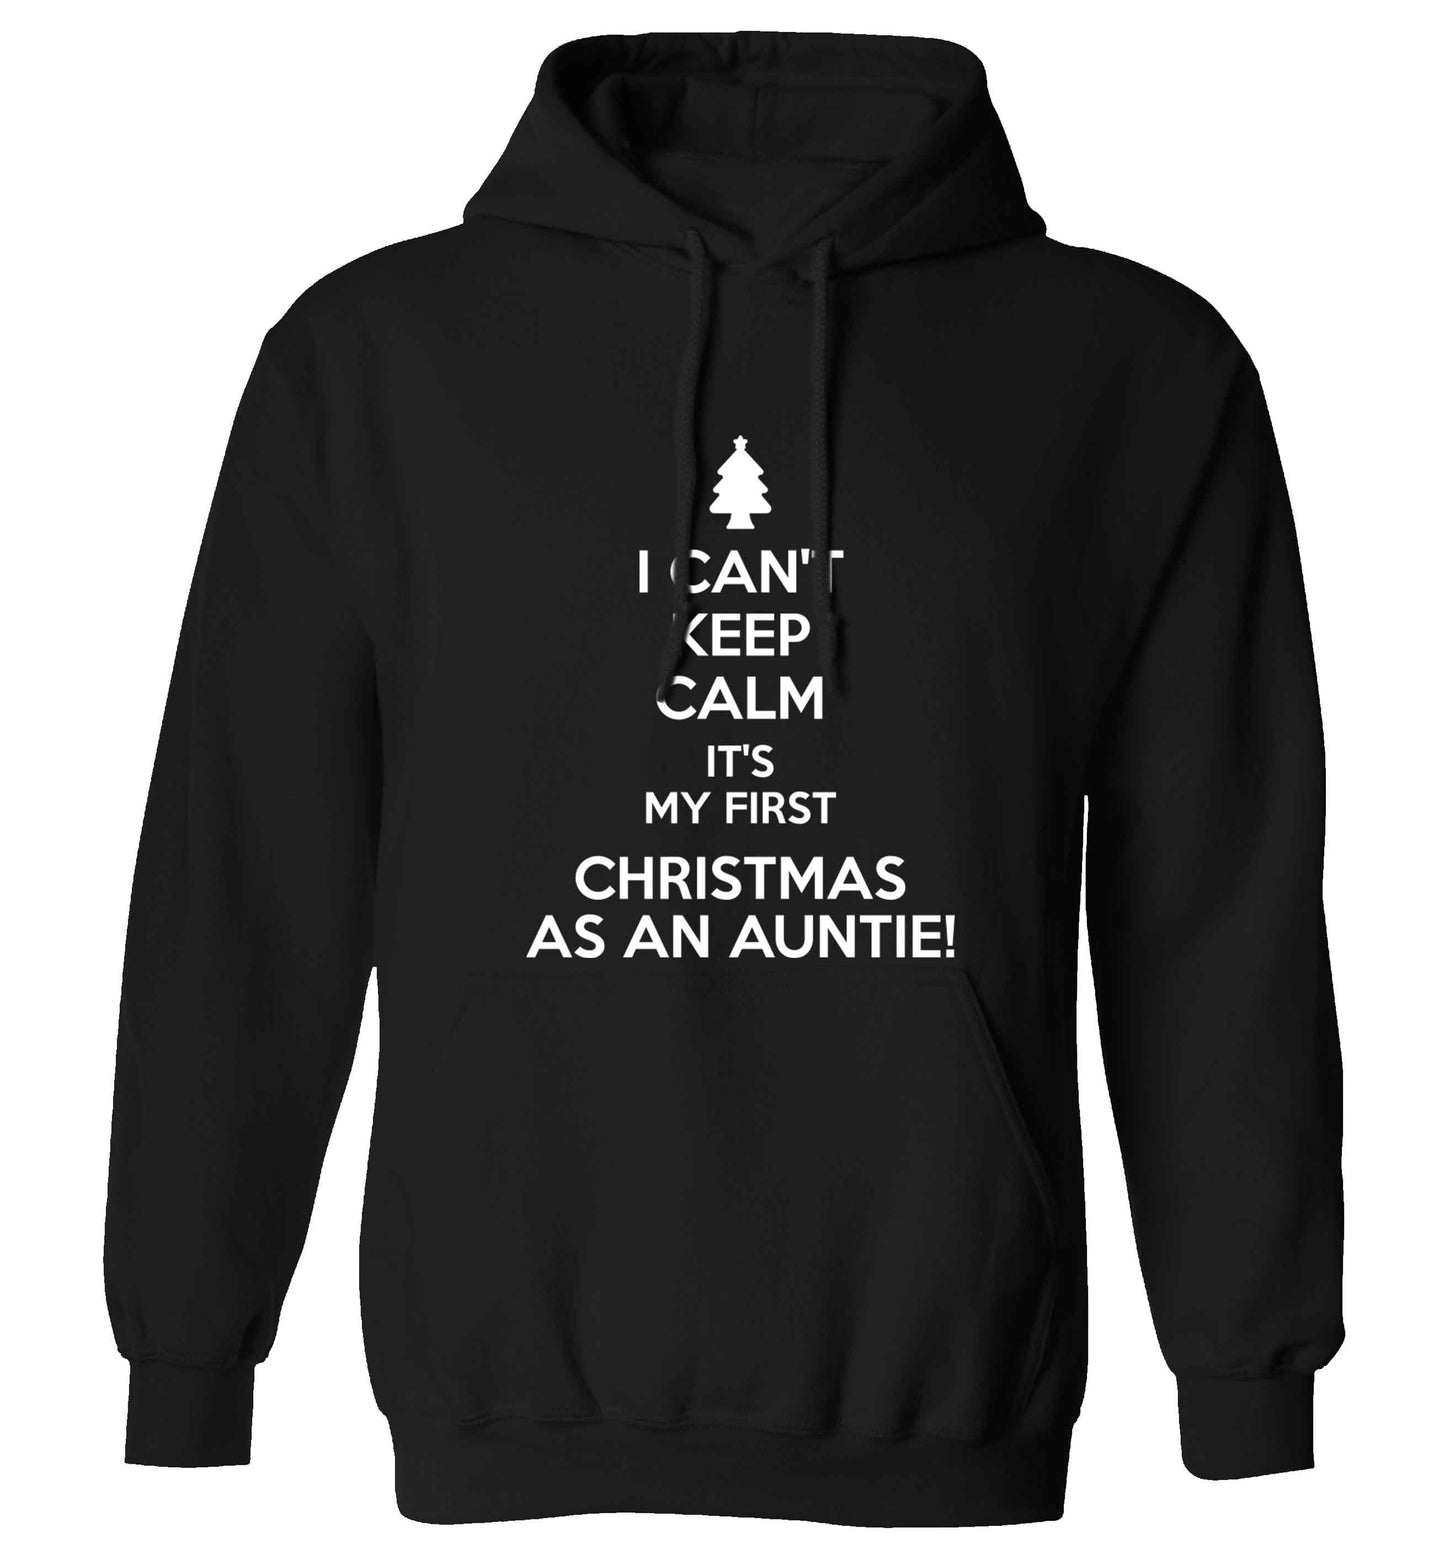 I can't keep calm it's my first Christmas as an auntie! adults unisex black hoodie 2XL